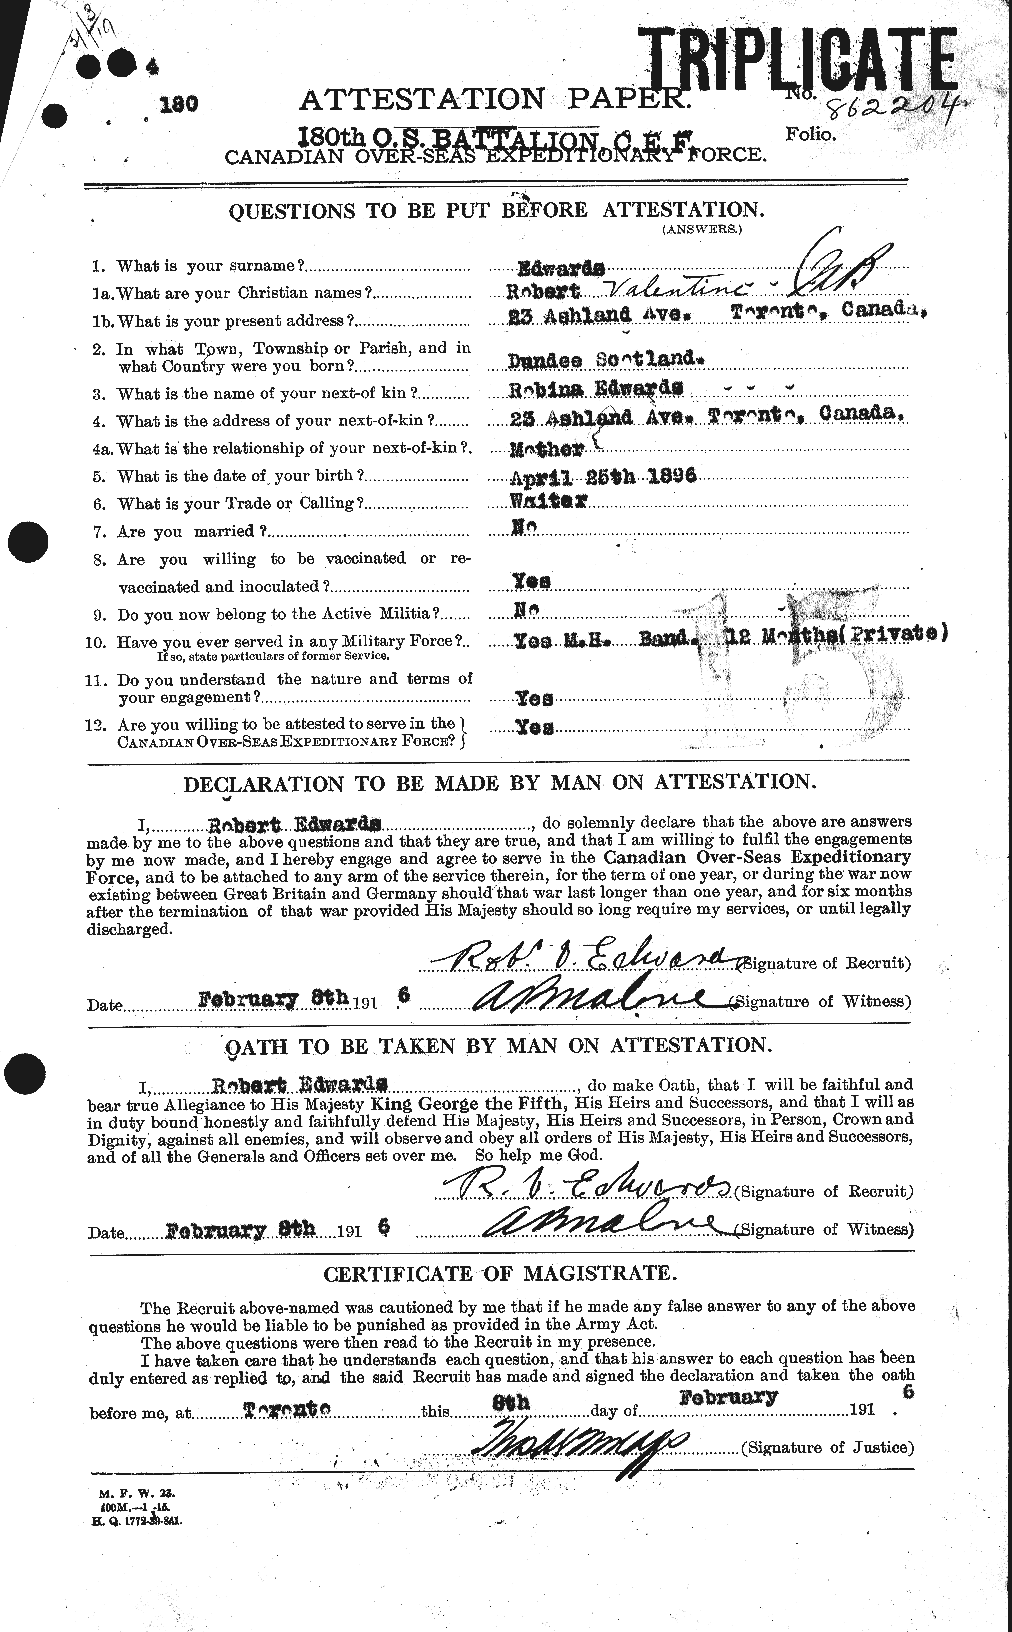 Personnel Records of the First World War - CEF 310285a